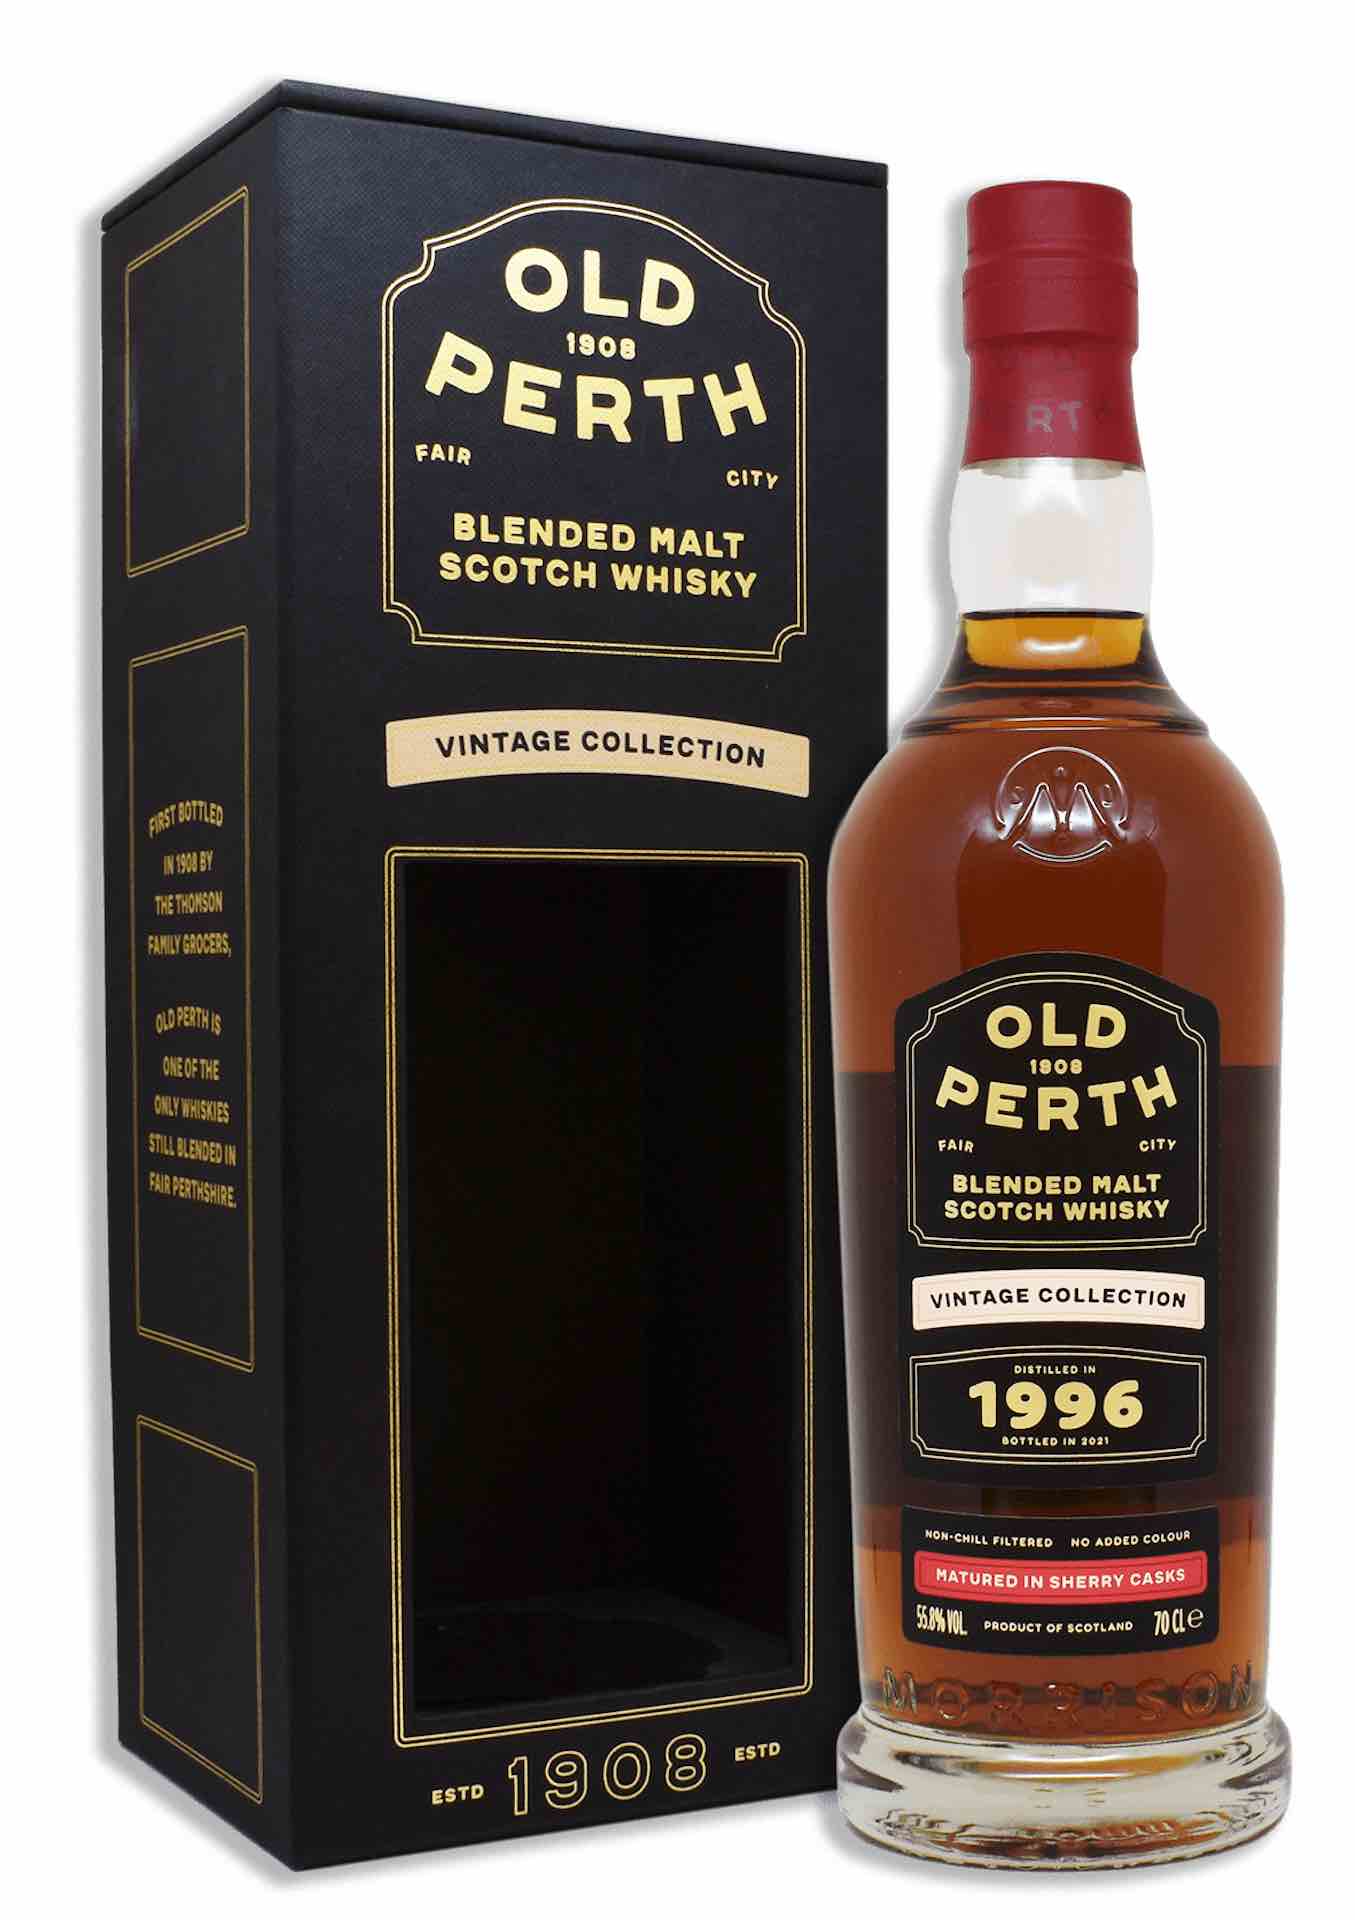 Old Perth Vintage 1996 Sherry Cask Whisky